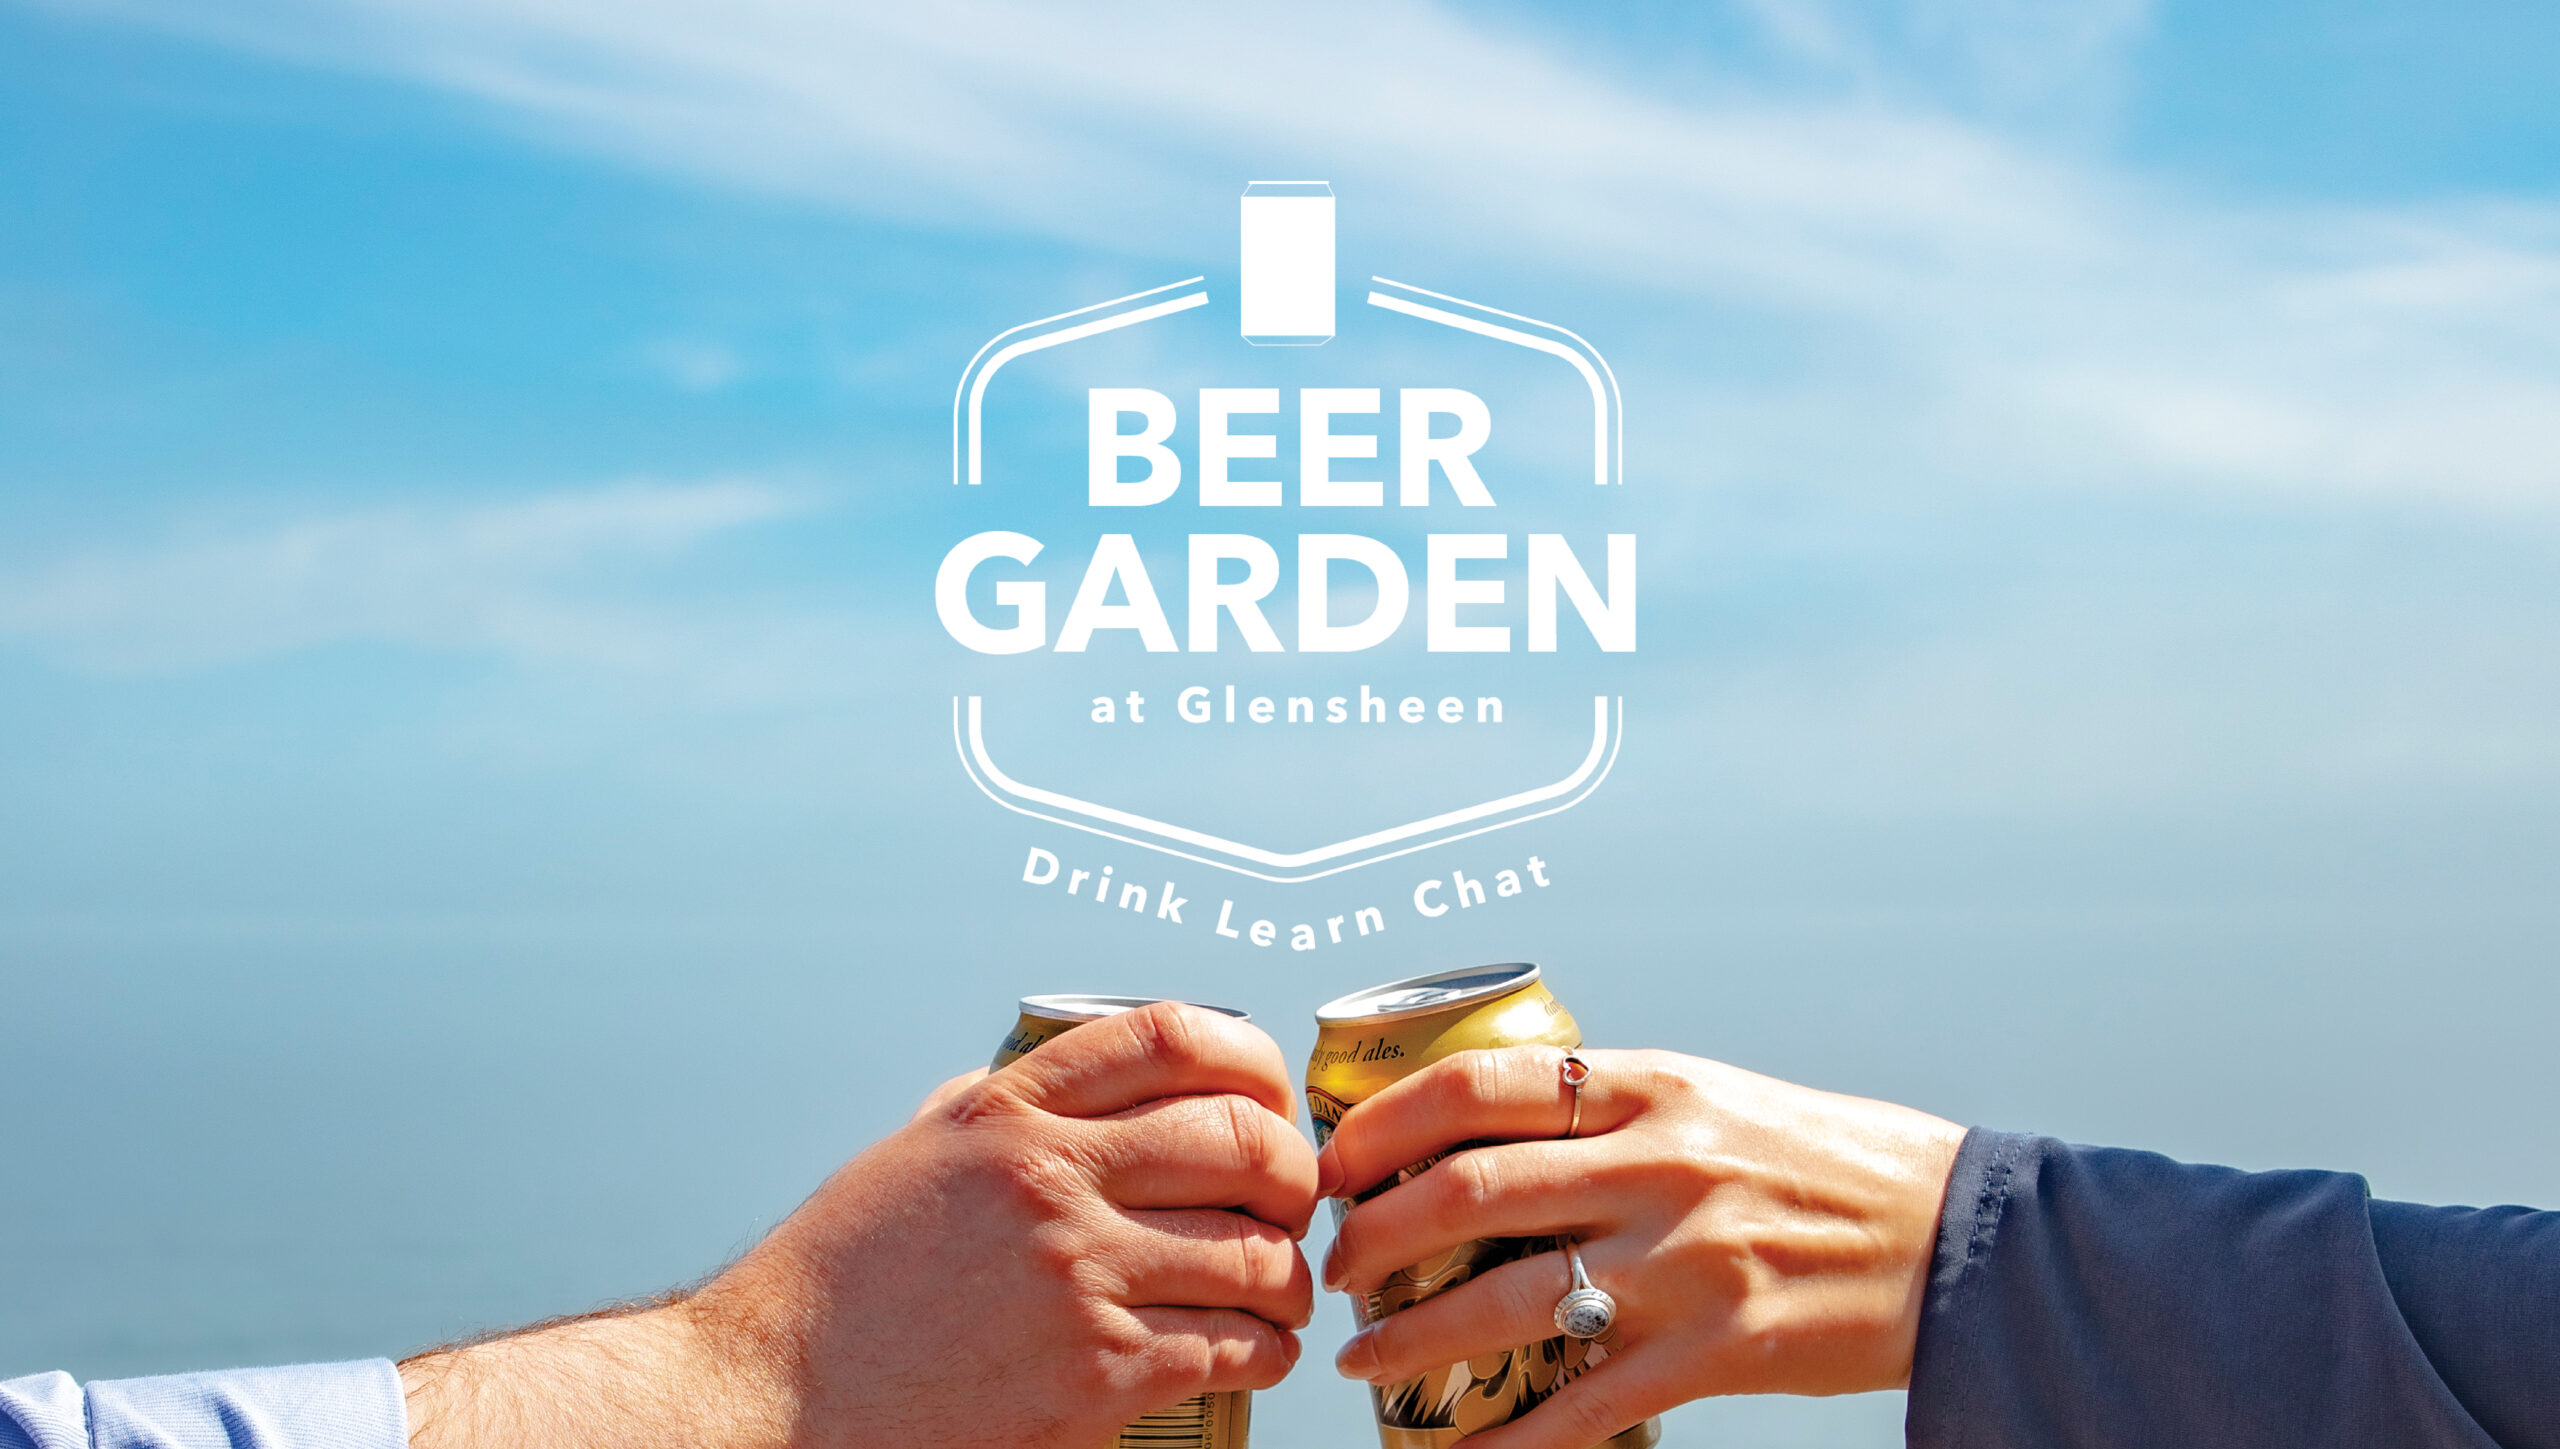 Two hands with cans cheers in front of a blue lake with light white clouds in a blue sky. A logo says Beer Garden at Glensheen.